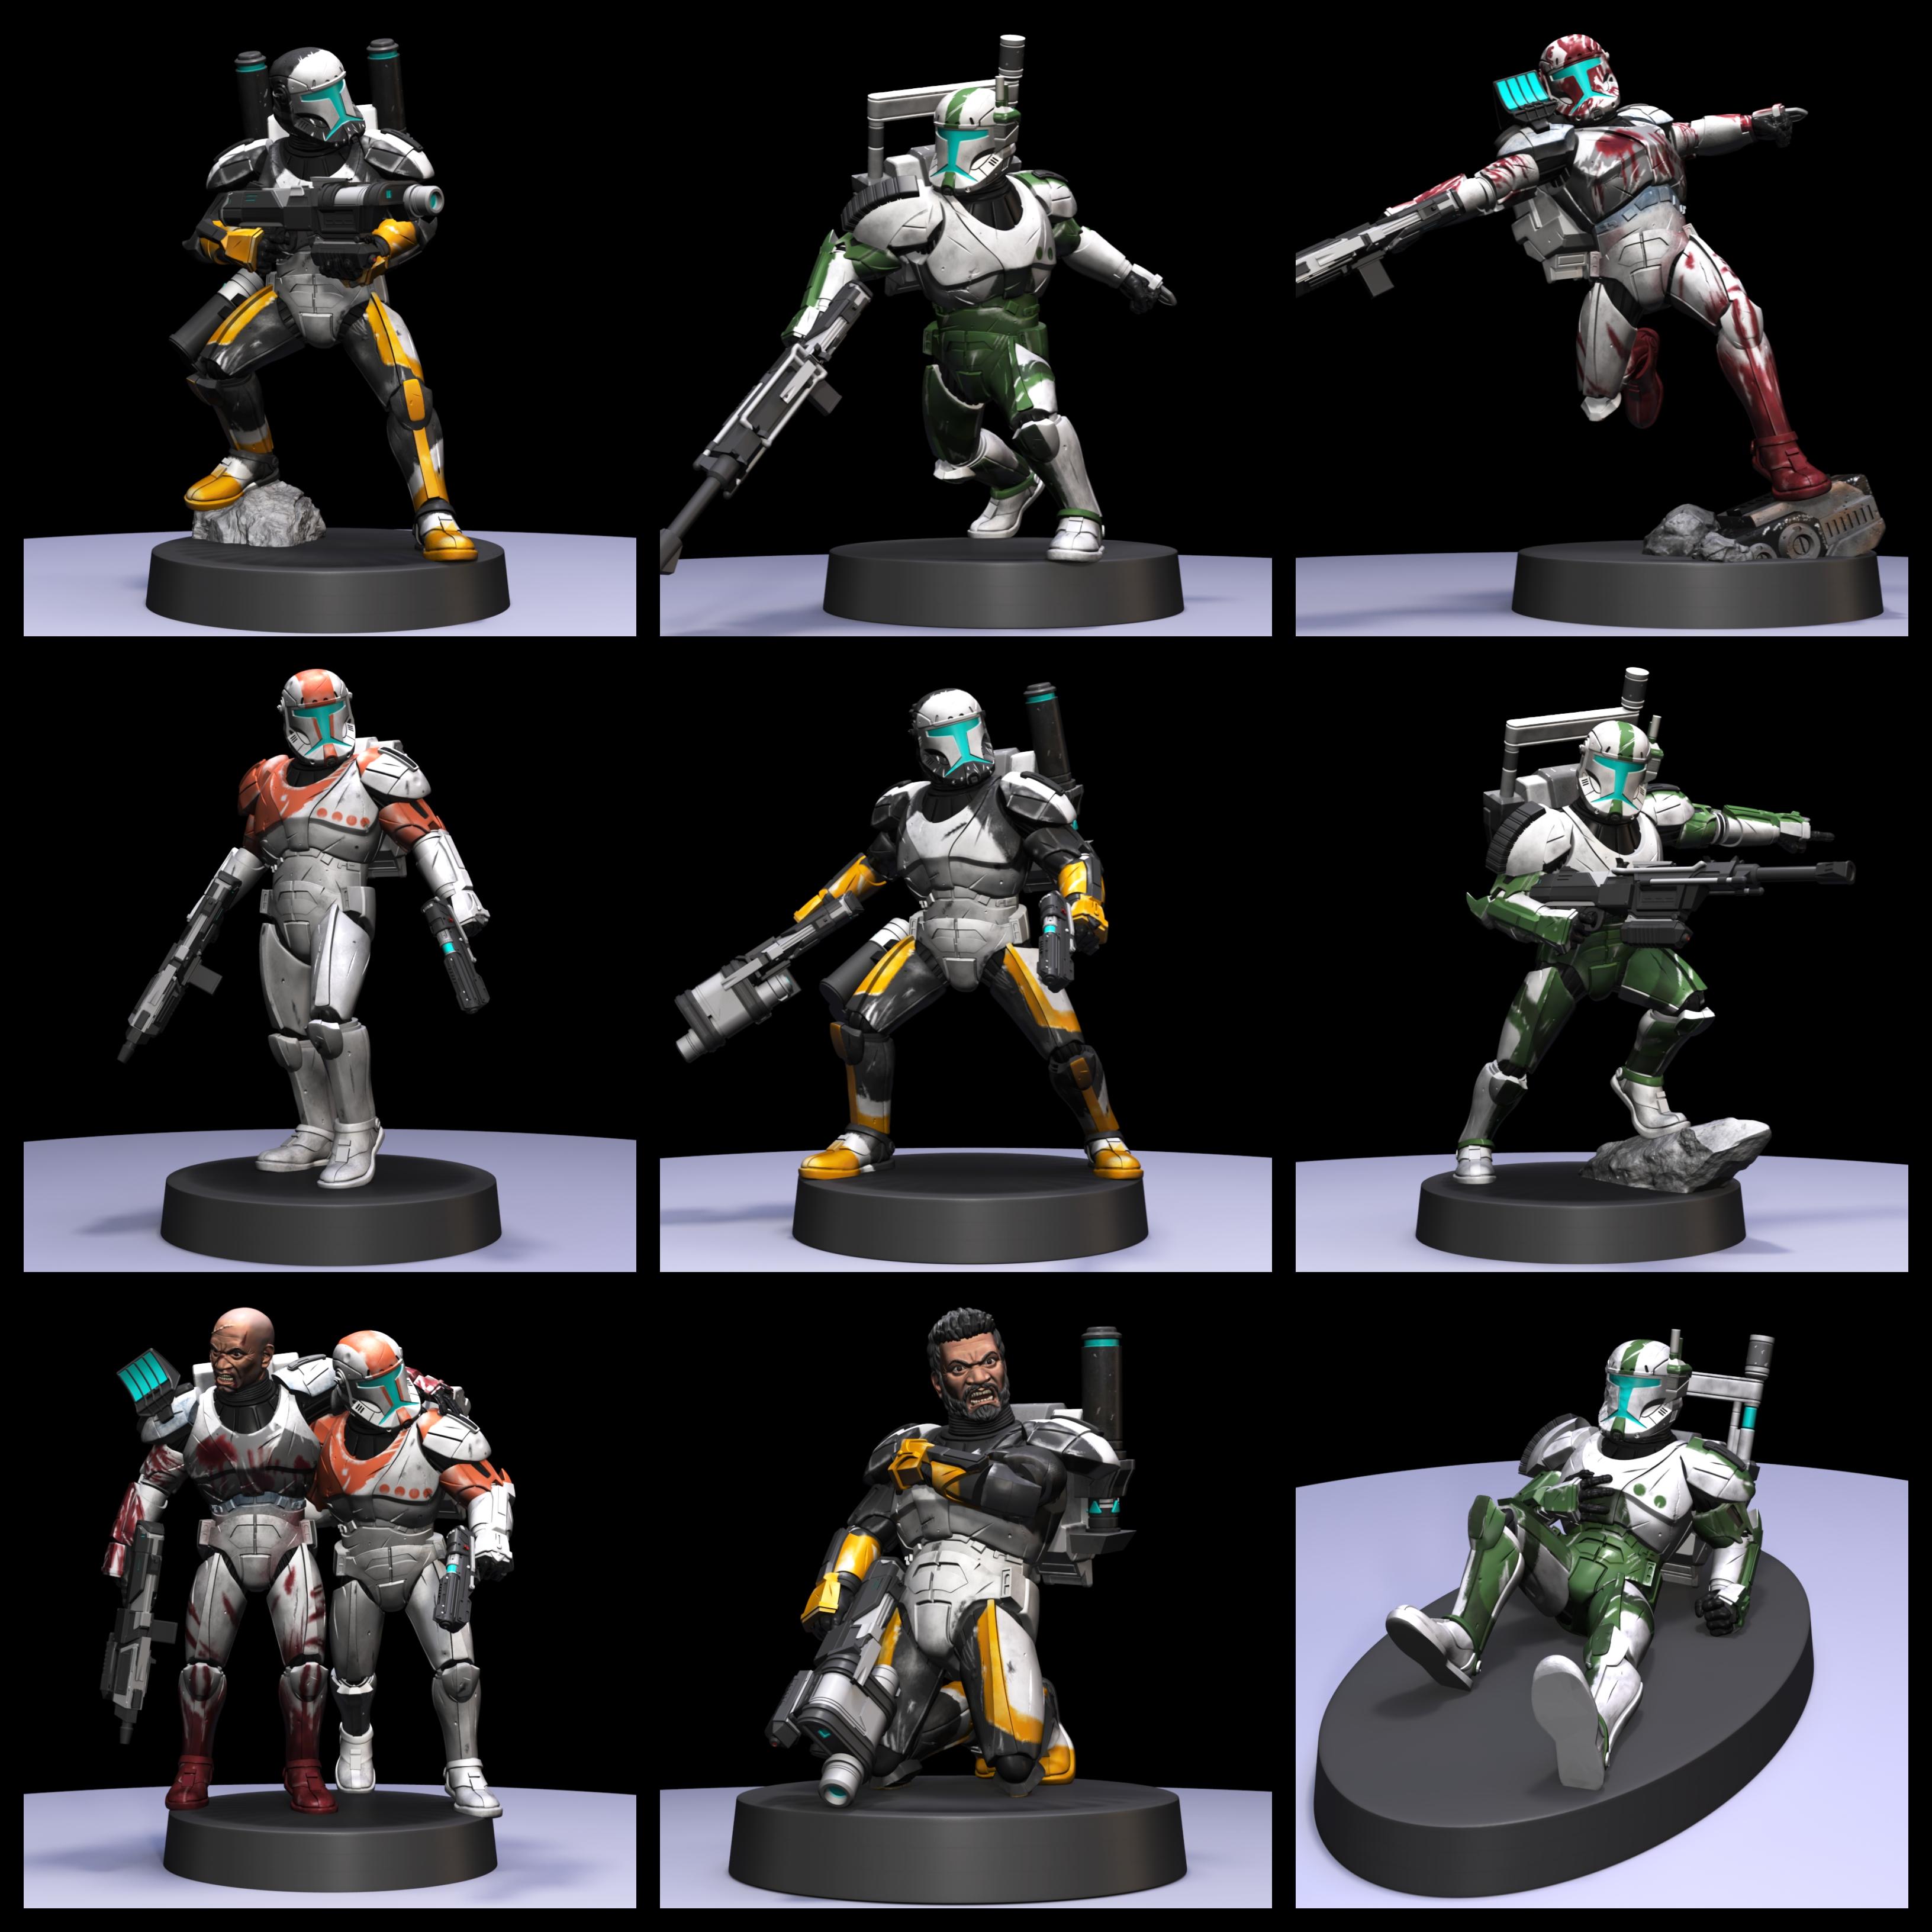 [New Files and Free Download!] The Republic Commando miniatures have been added to the February Miniature rewards!